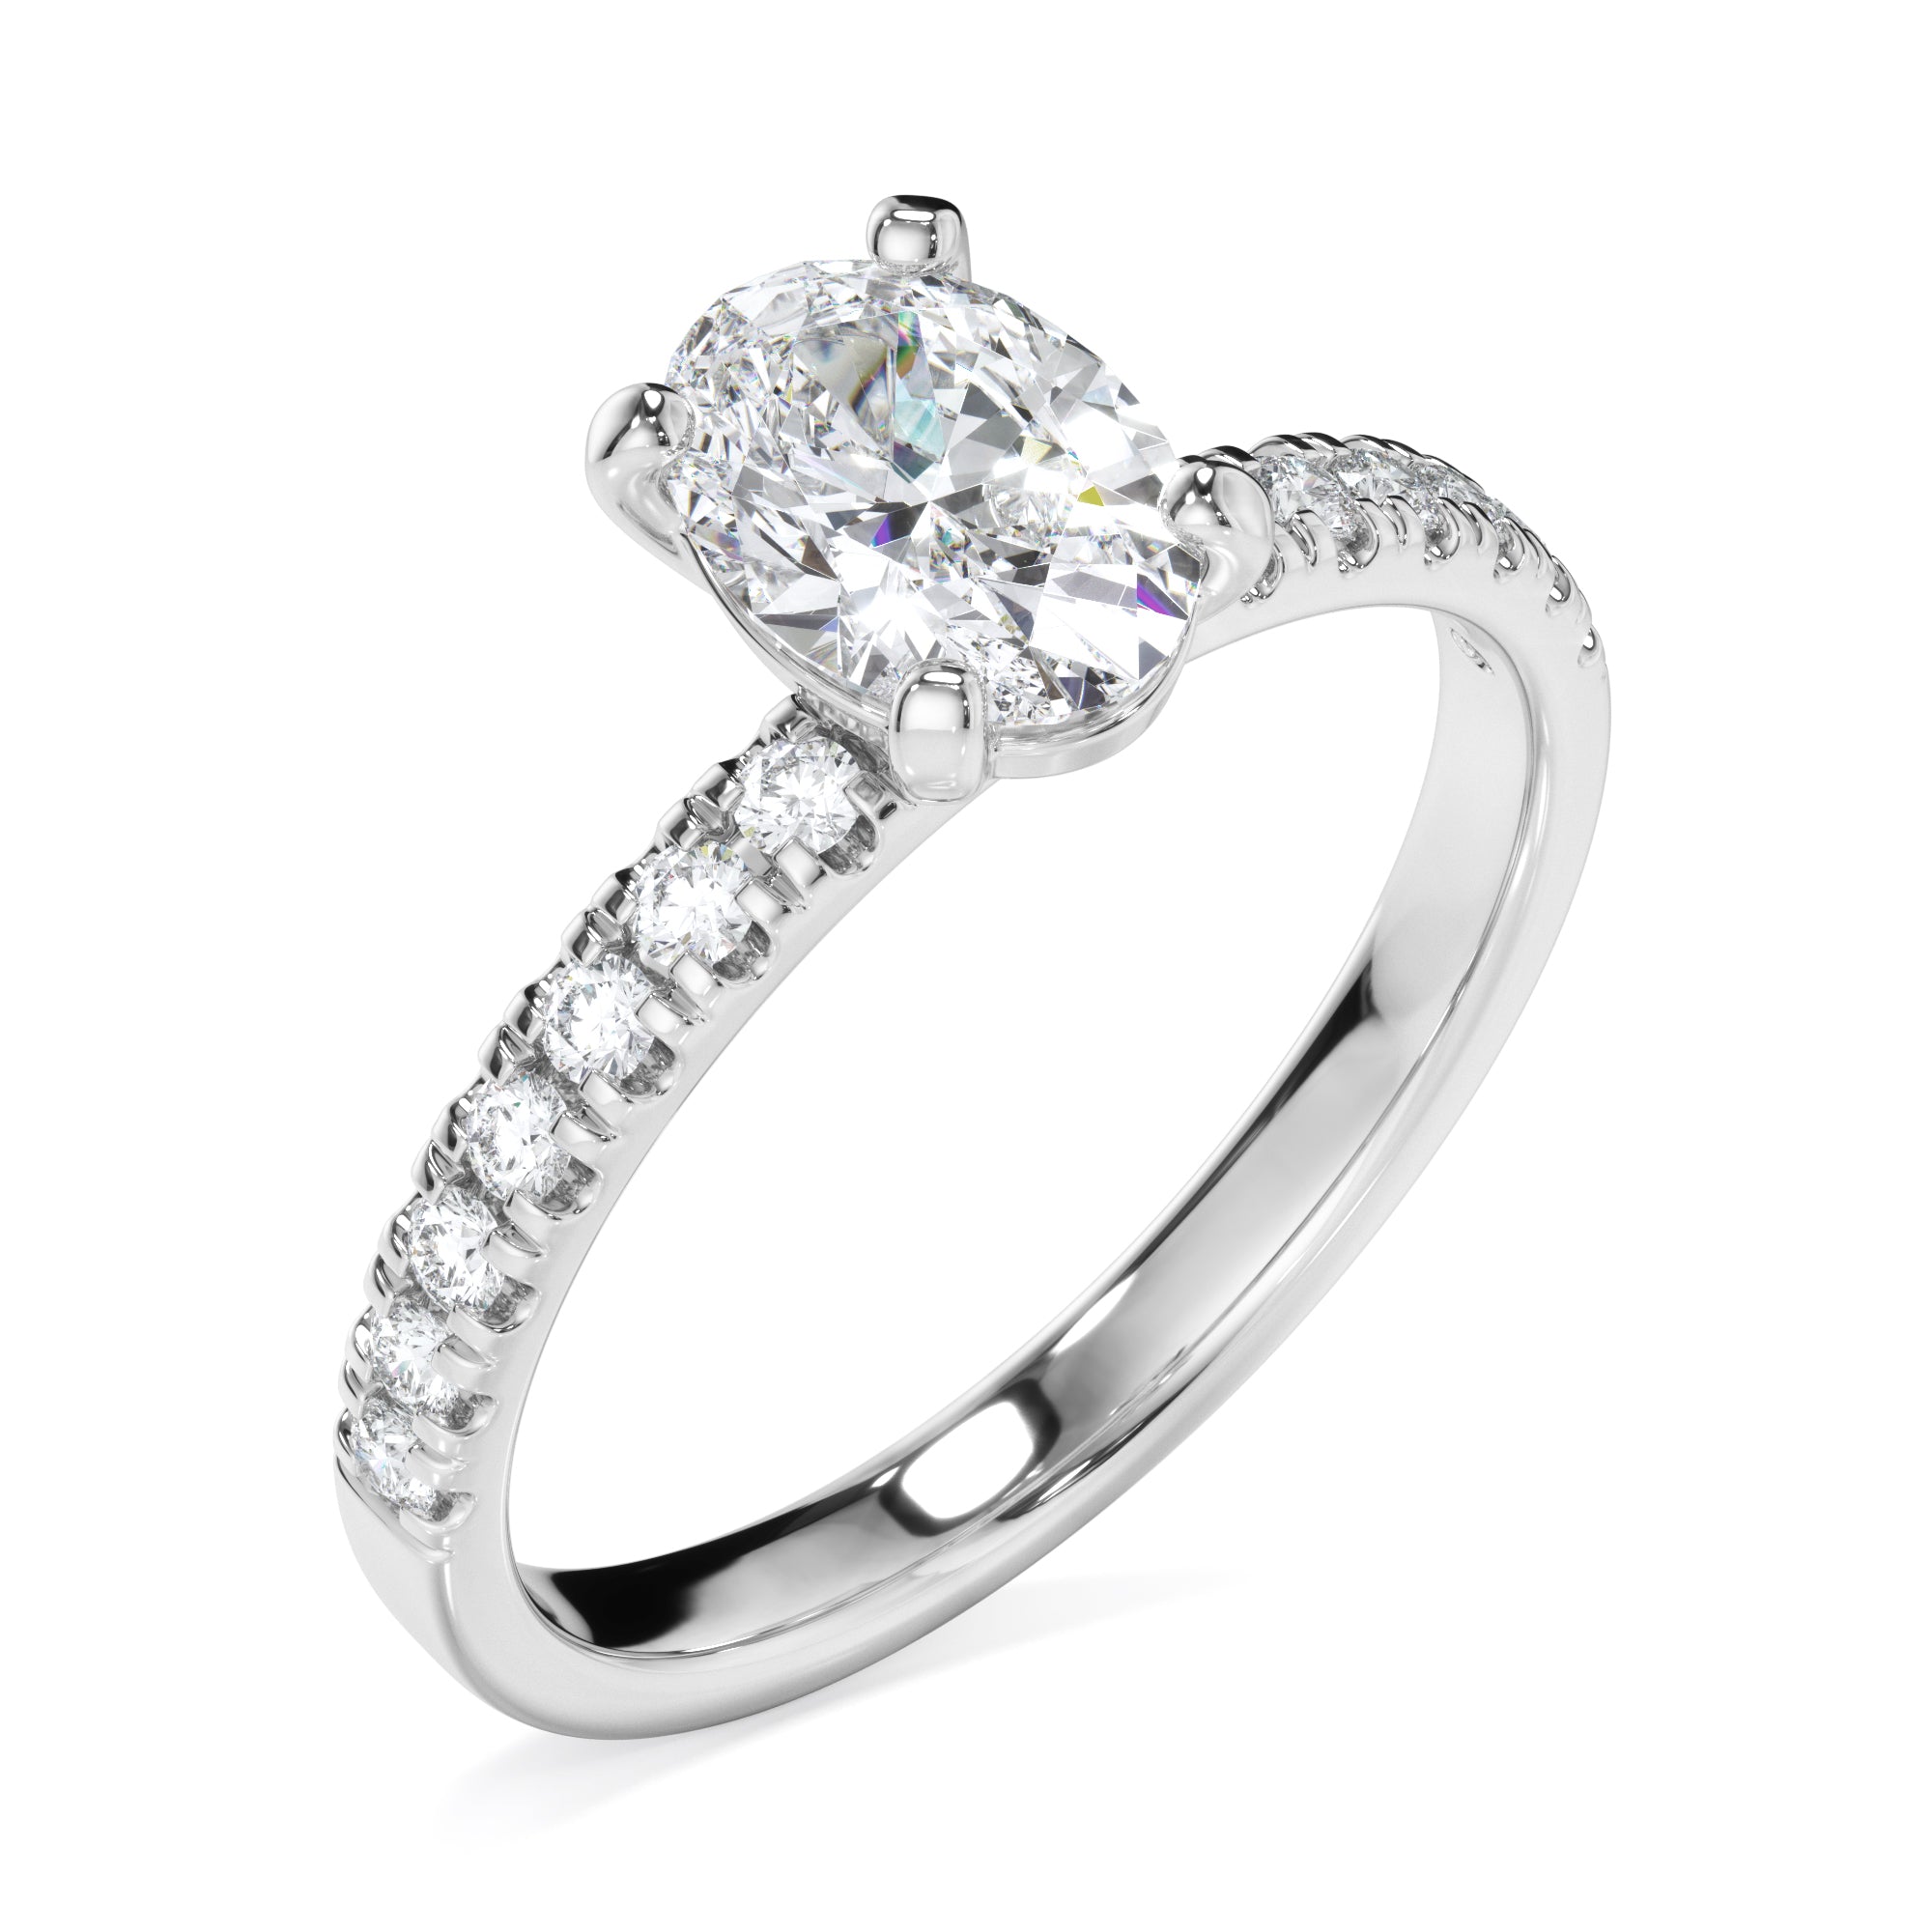 18ct White Gold Oval Cut Diamond Engagement Ring with Shoulder Stone